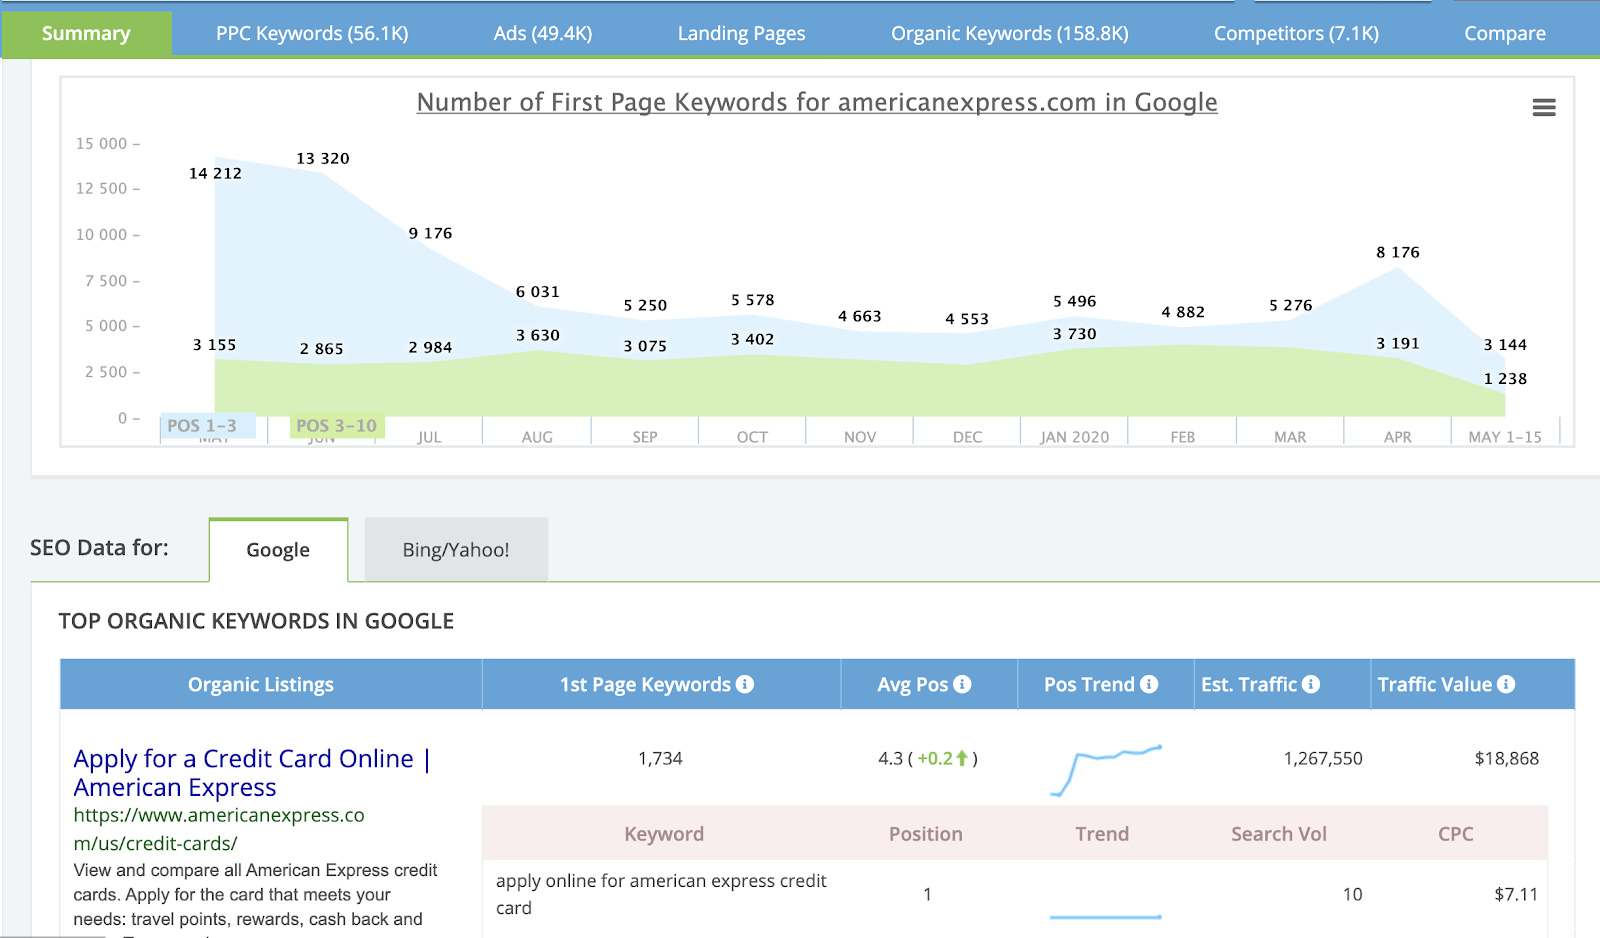 iSpionage makes it easy to see the number of First Page Keywords that your competitor is ranking for.